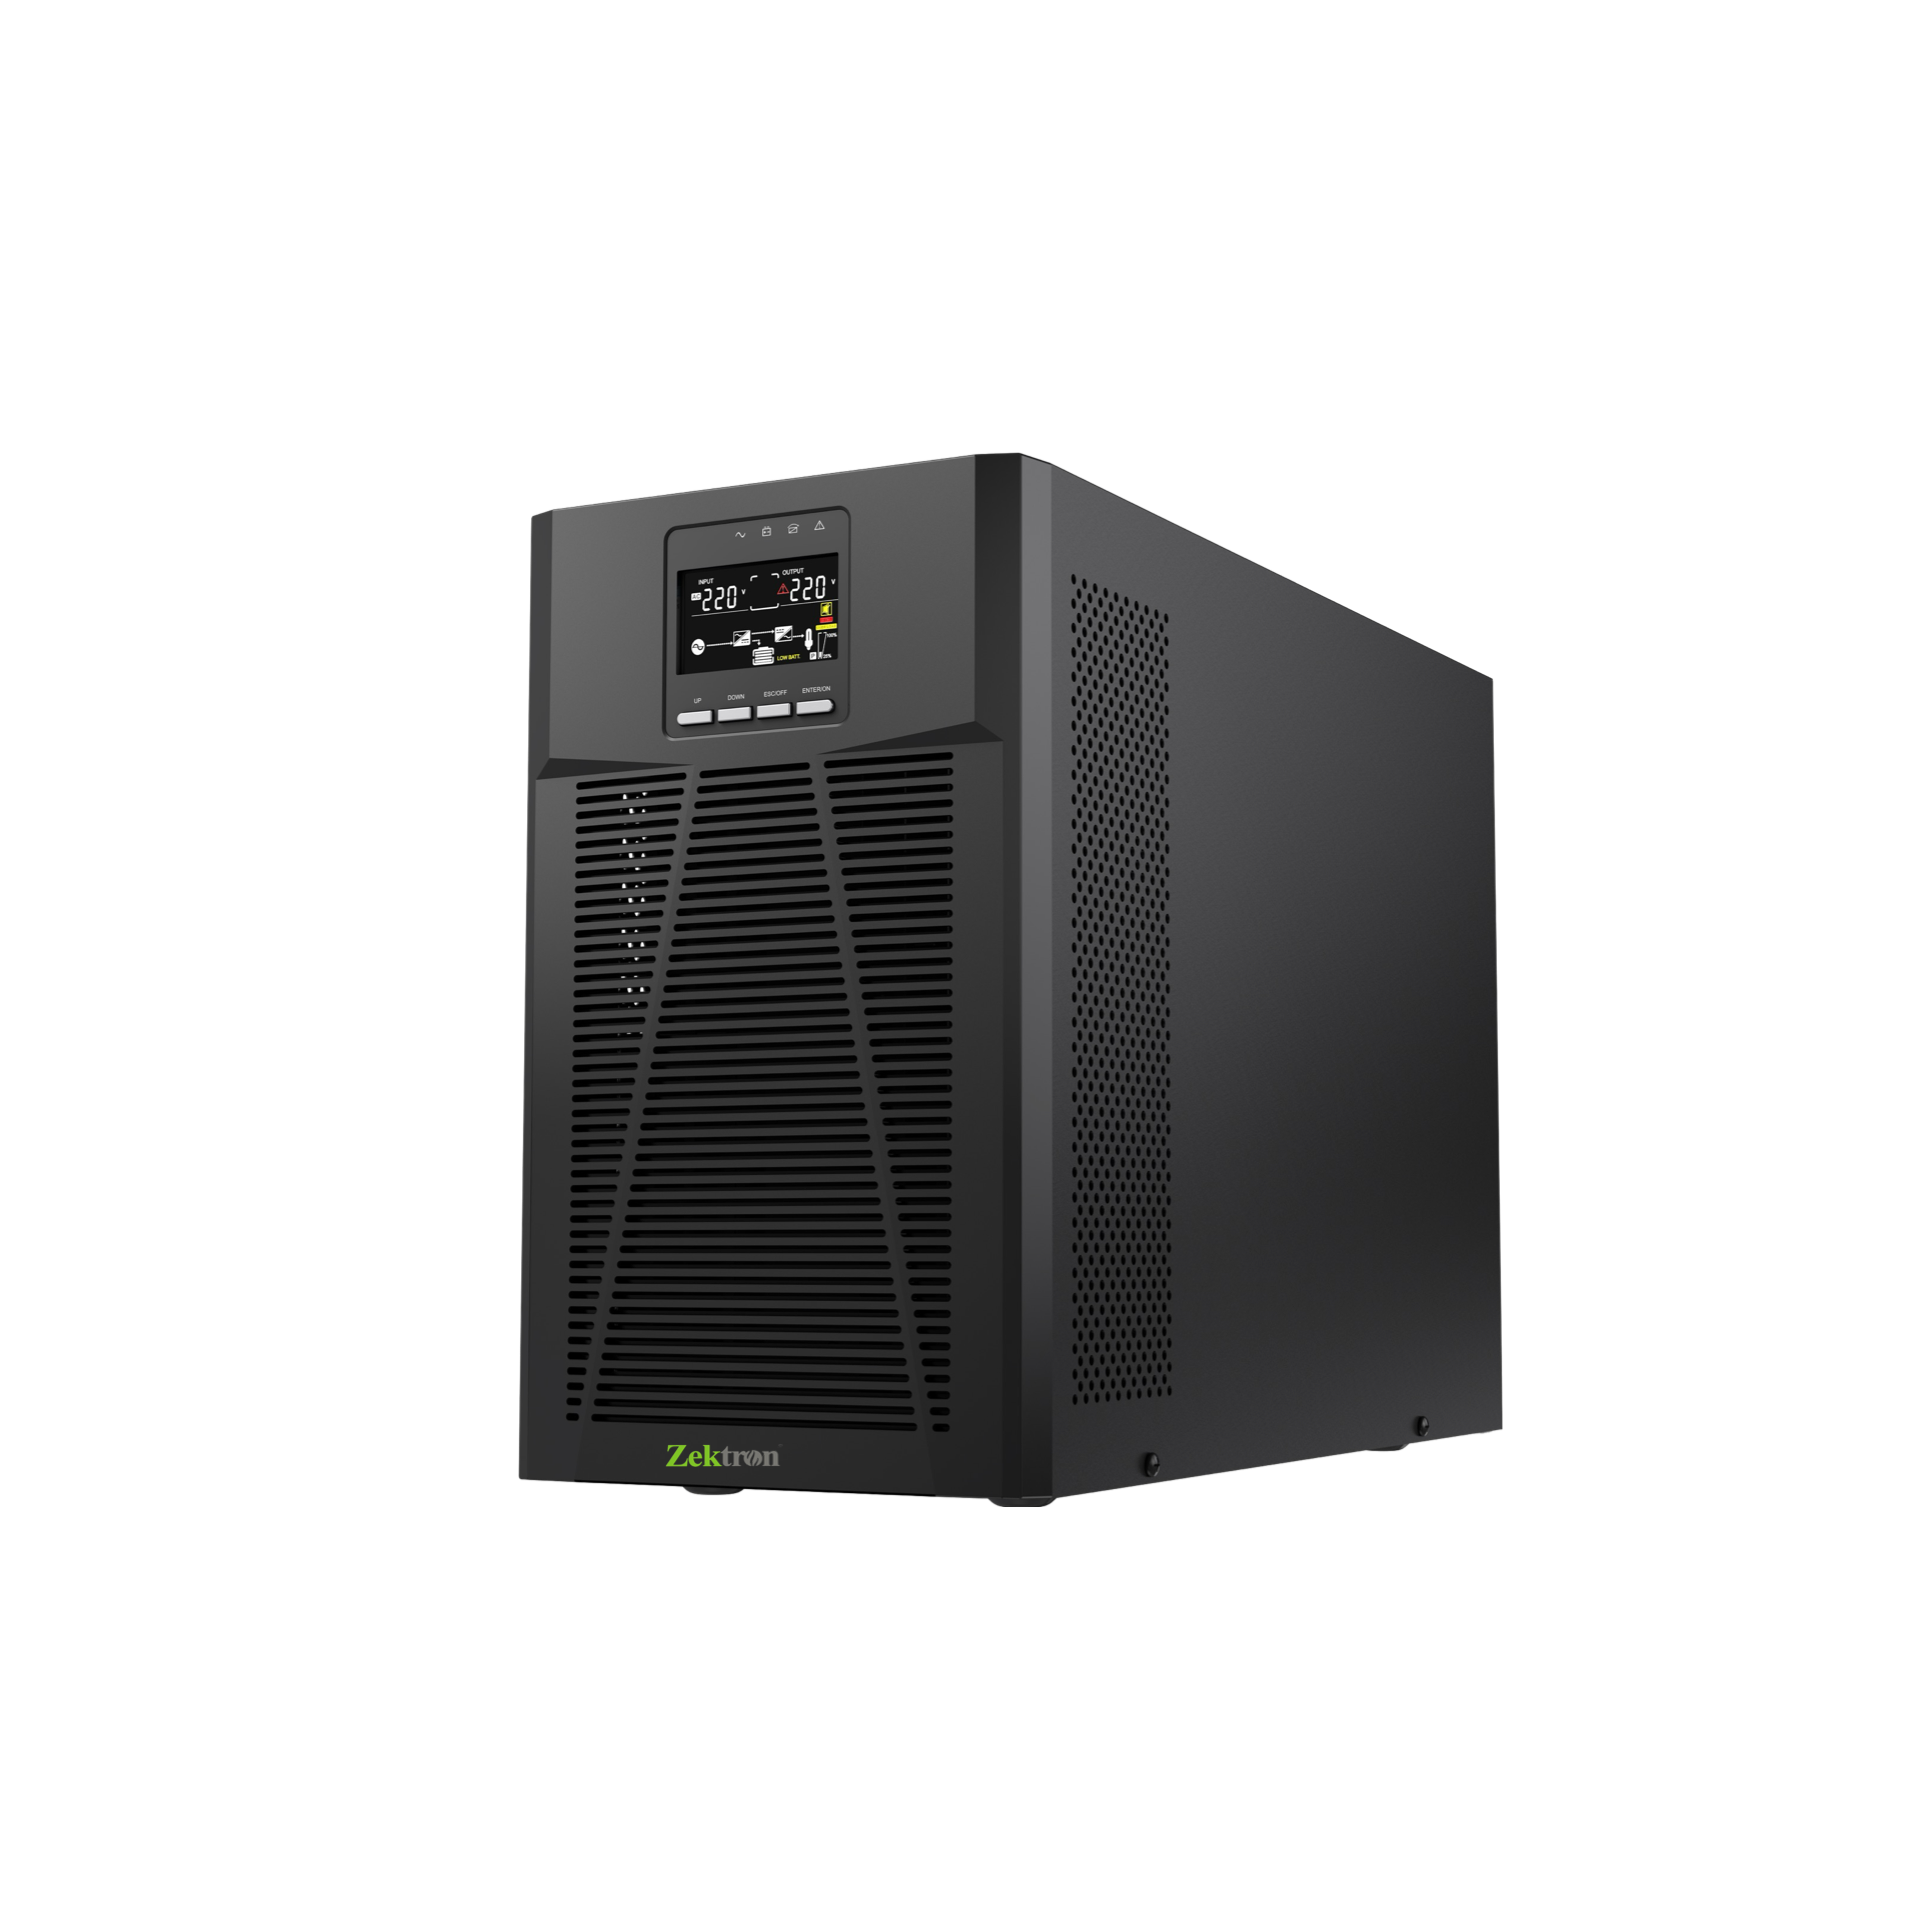 Power your critical equipment with Zektron Online UPS Systems and maximize your uptime today